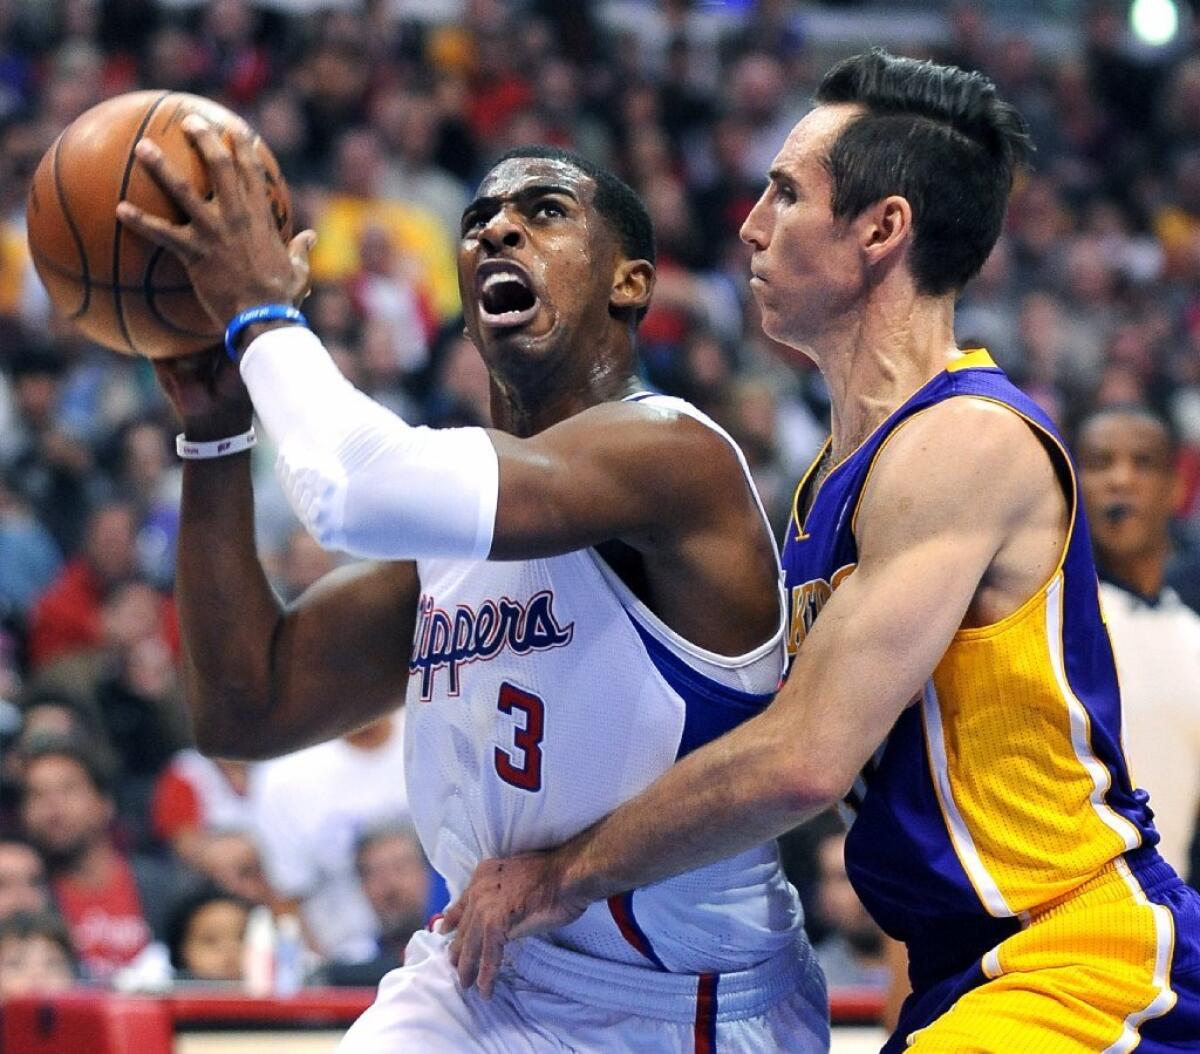 Chris Paul of the Clippers downplays talk of a rivalry with Steve Nash and the Lakers.